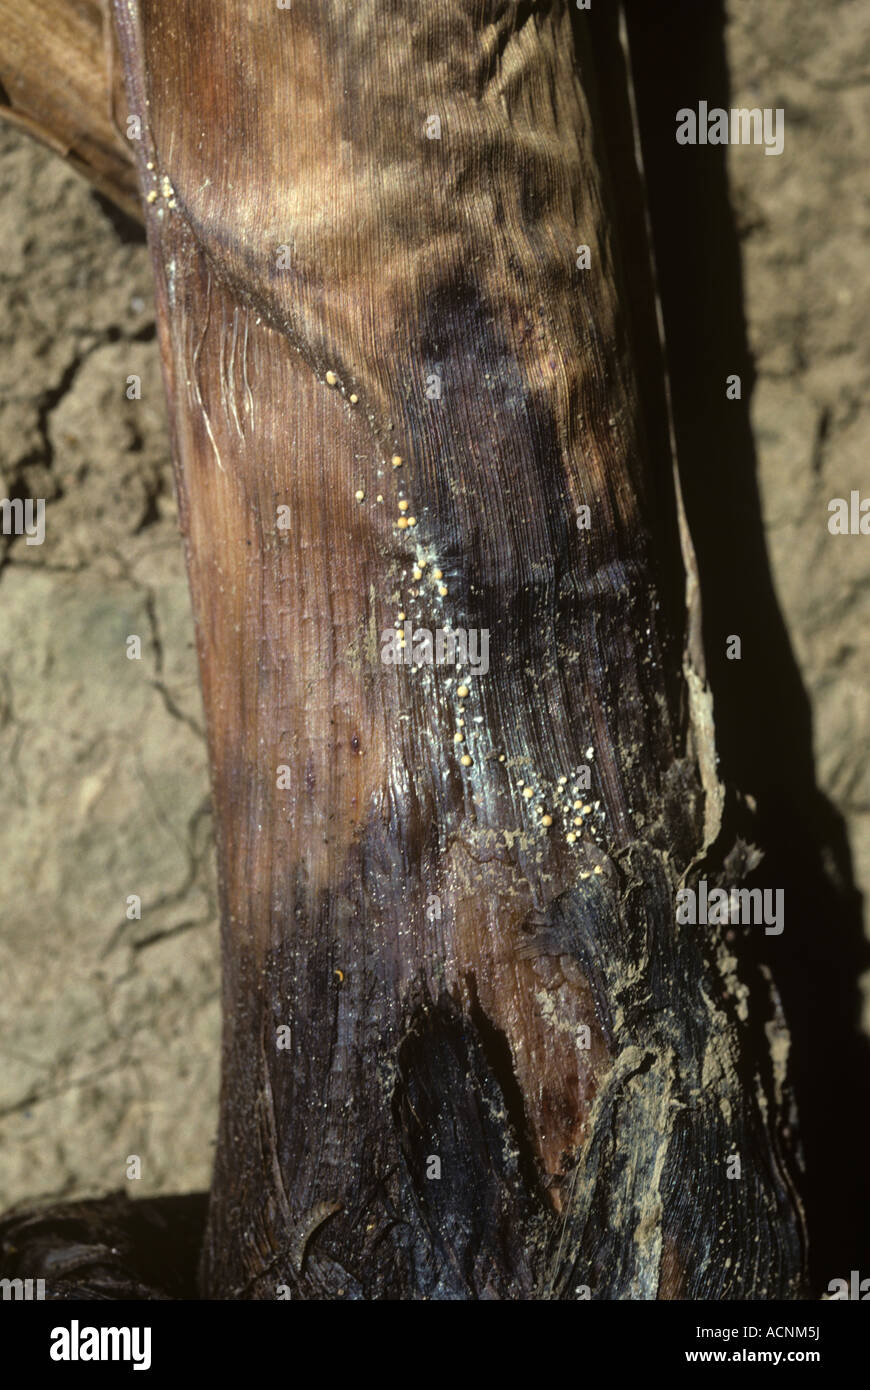 Southern blight (Athelia rolfsii) sclerotia and rot at the base of a young banana Thailand Stock Photo